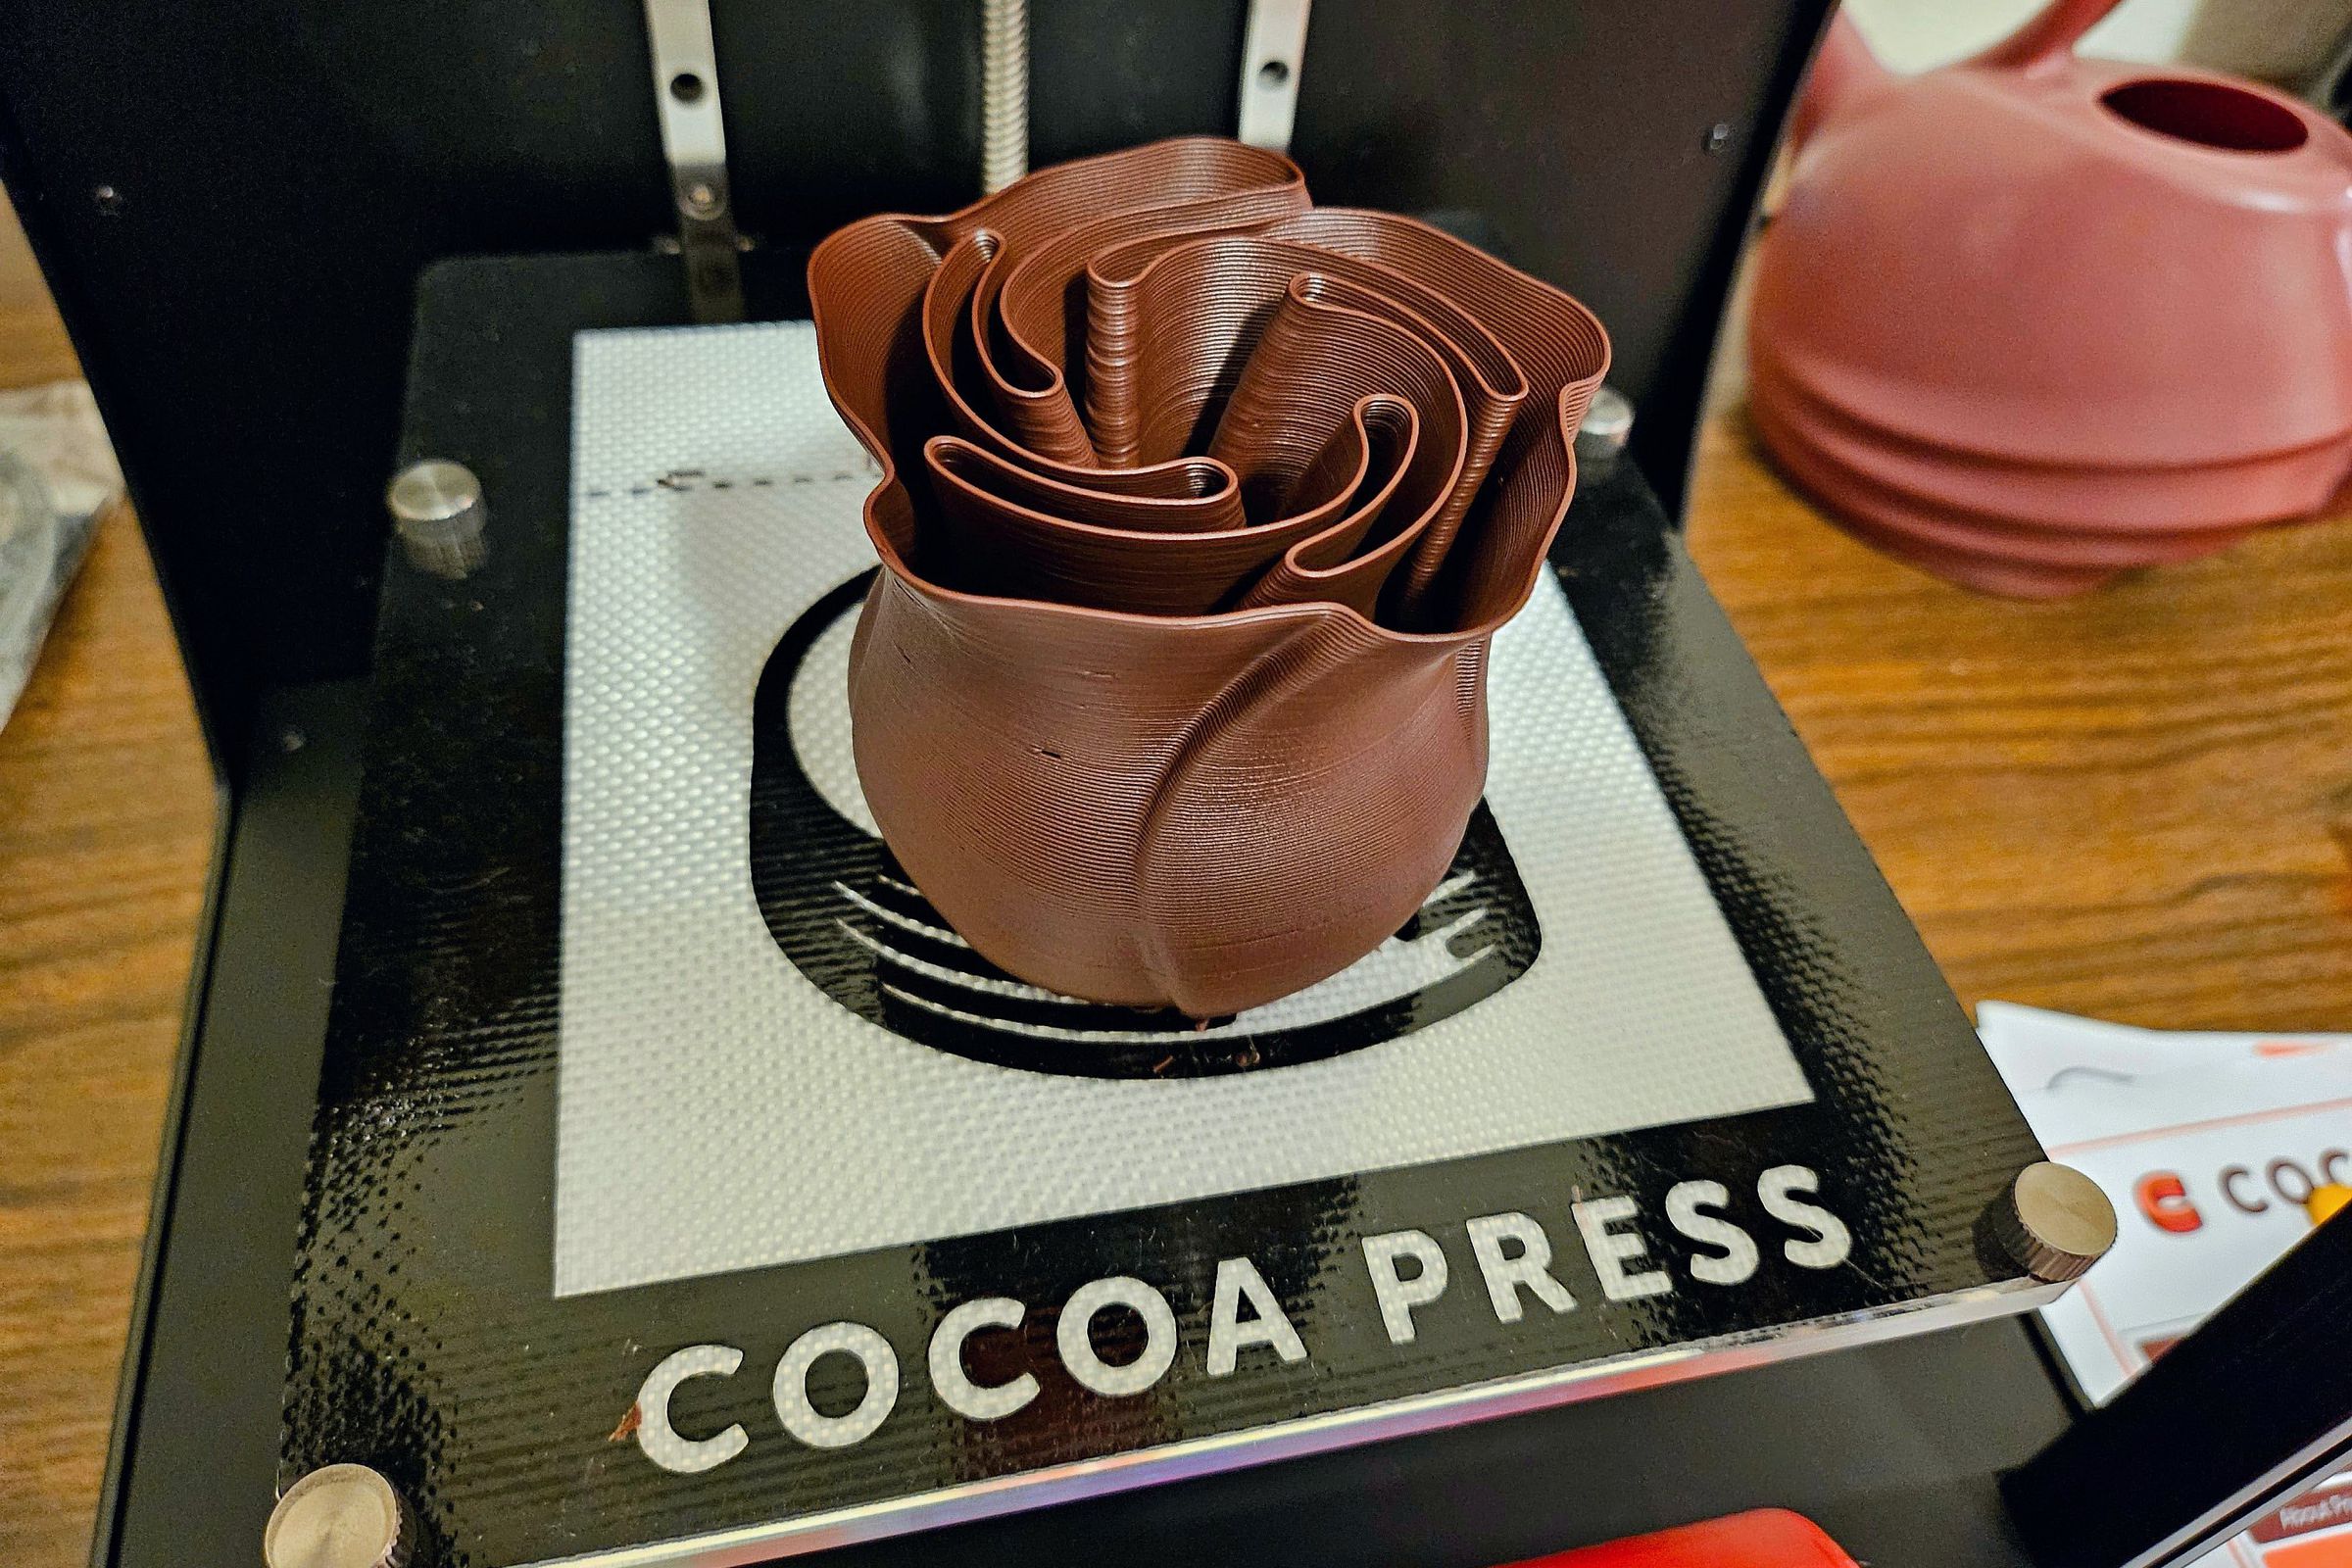 A chocolate rose vase printed on the Cocoa Press.